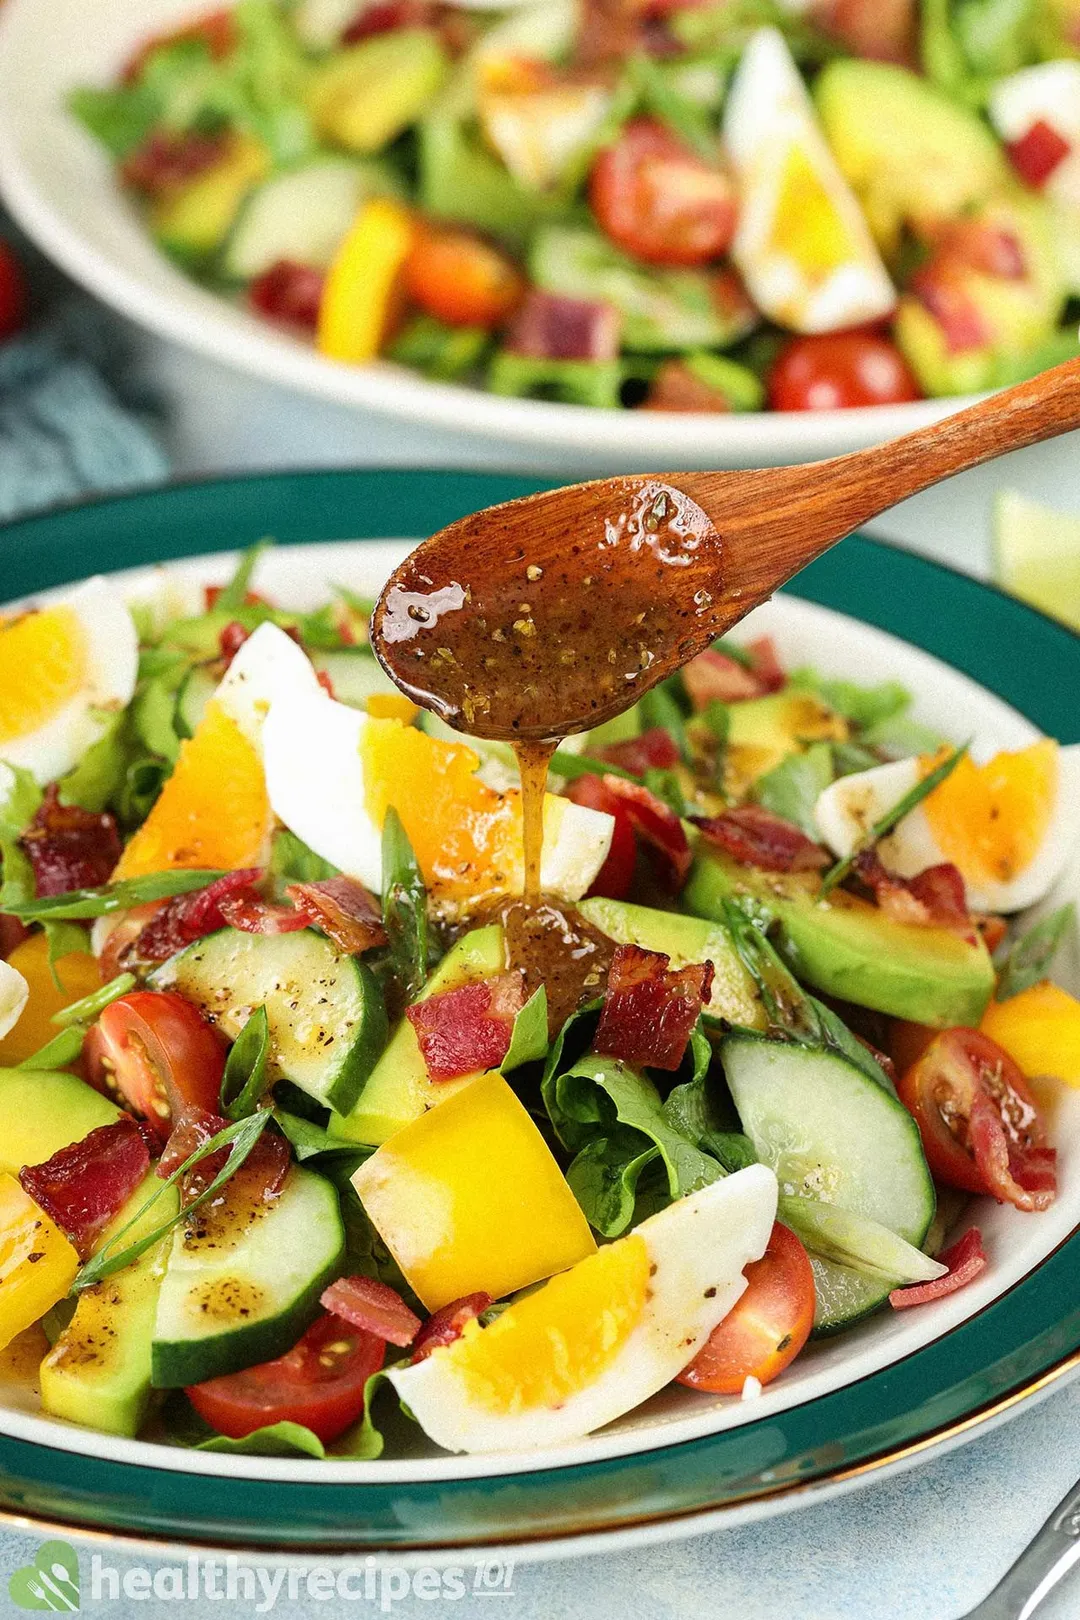 A wooden spoon distributing a thick dressing onto a chopped salad plate filled with hard-boiled eggs, halved cherry tomatoes, sliced cucumbers, and lettuce